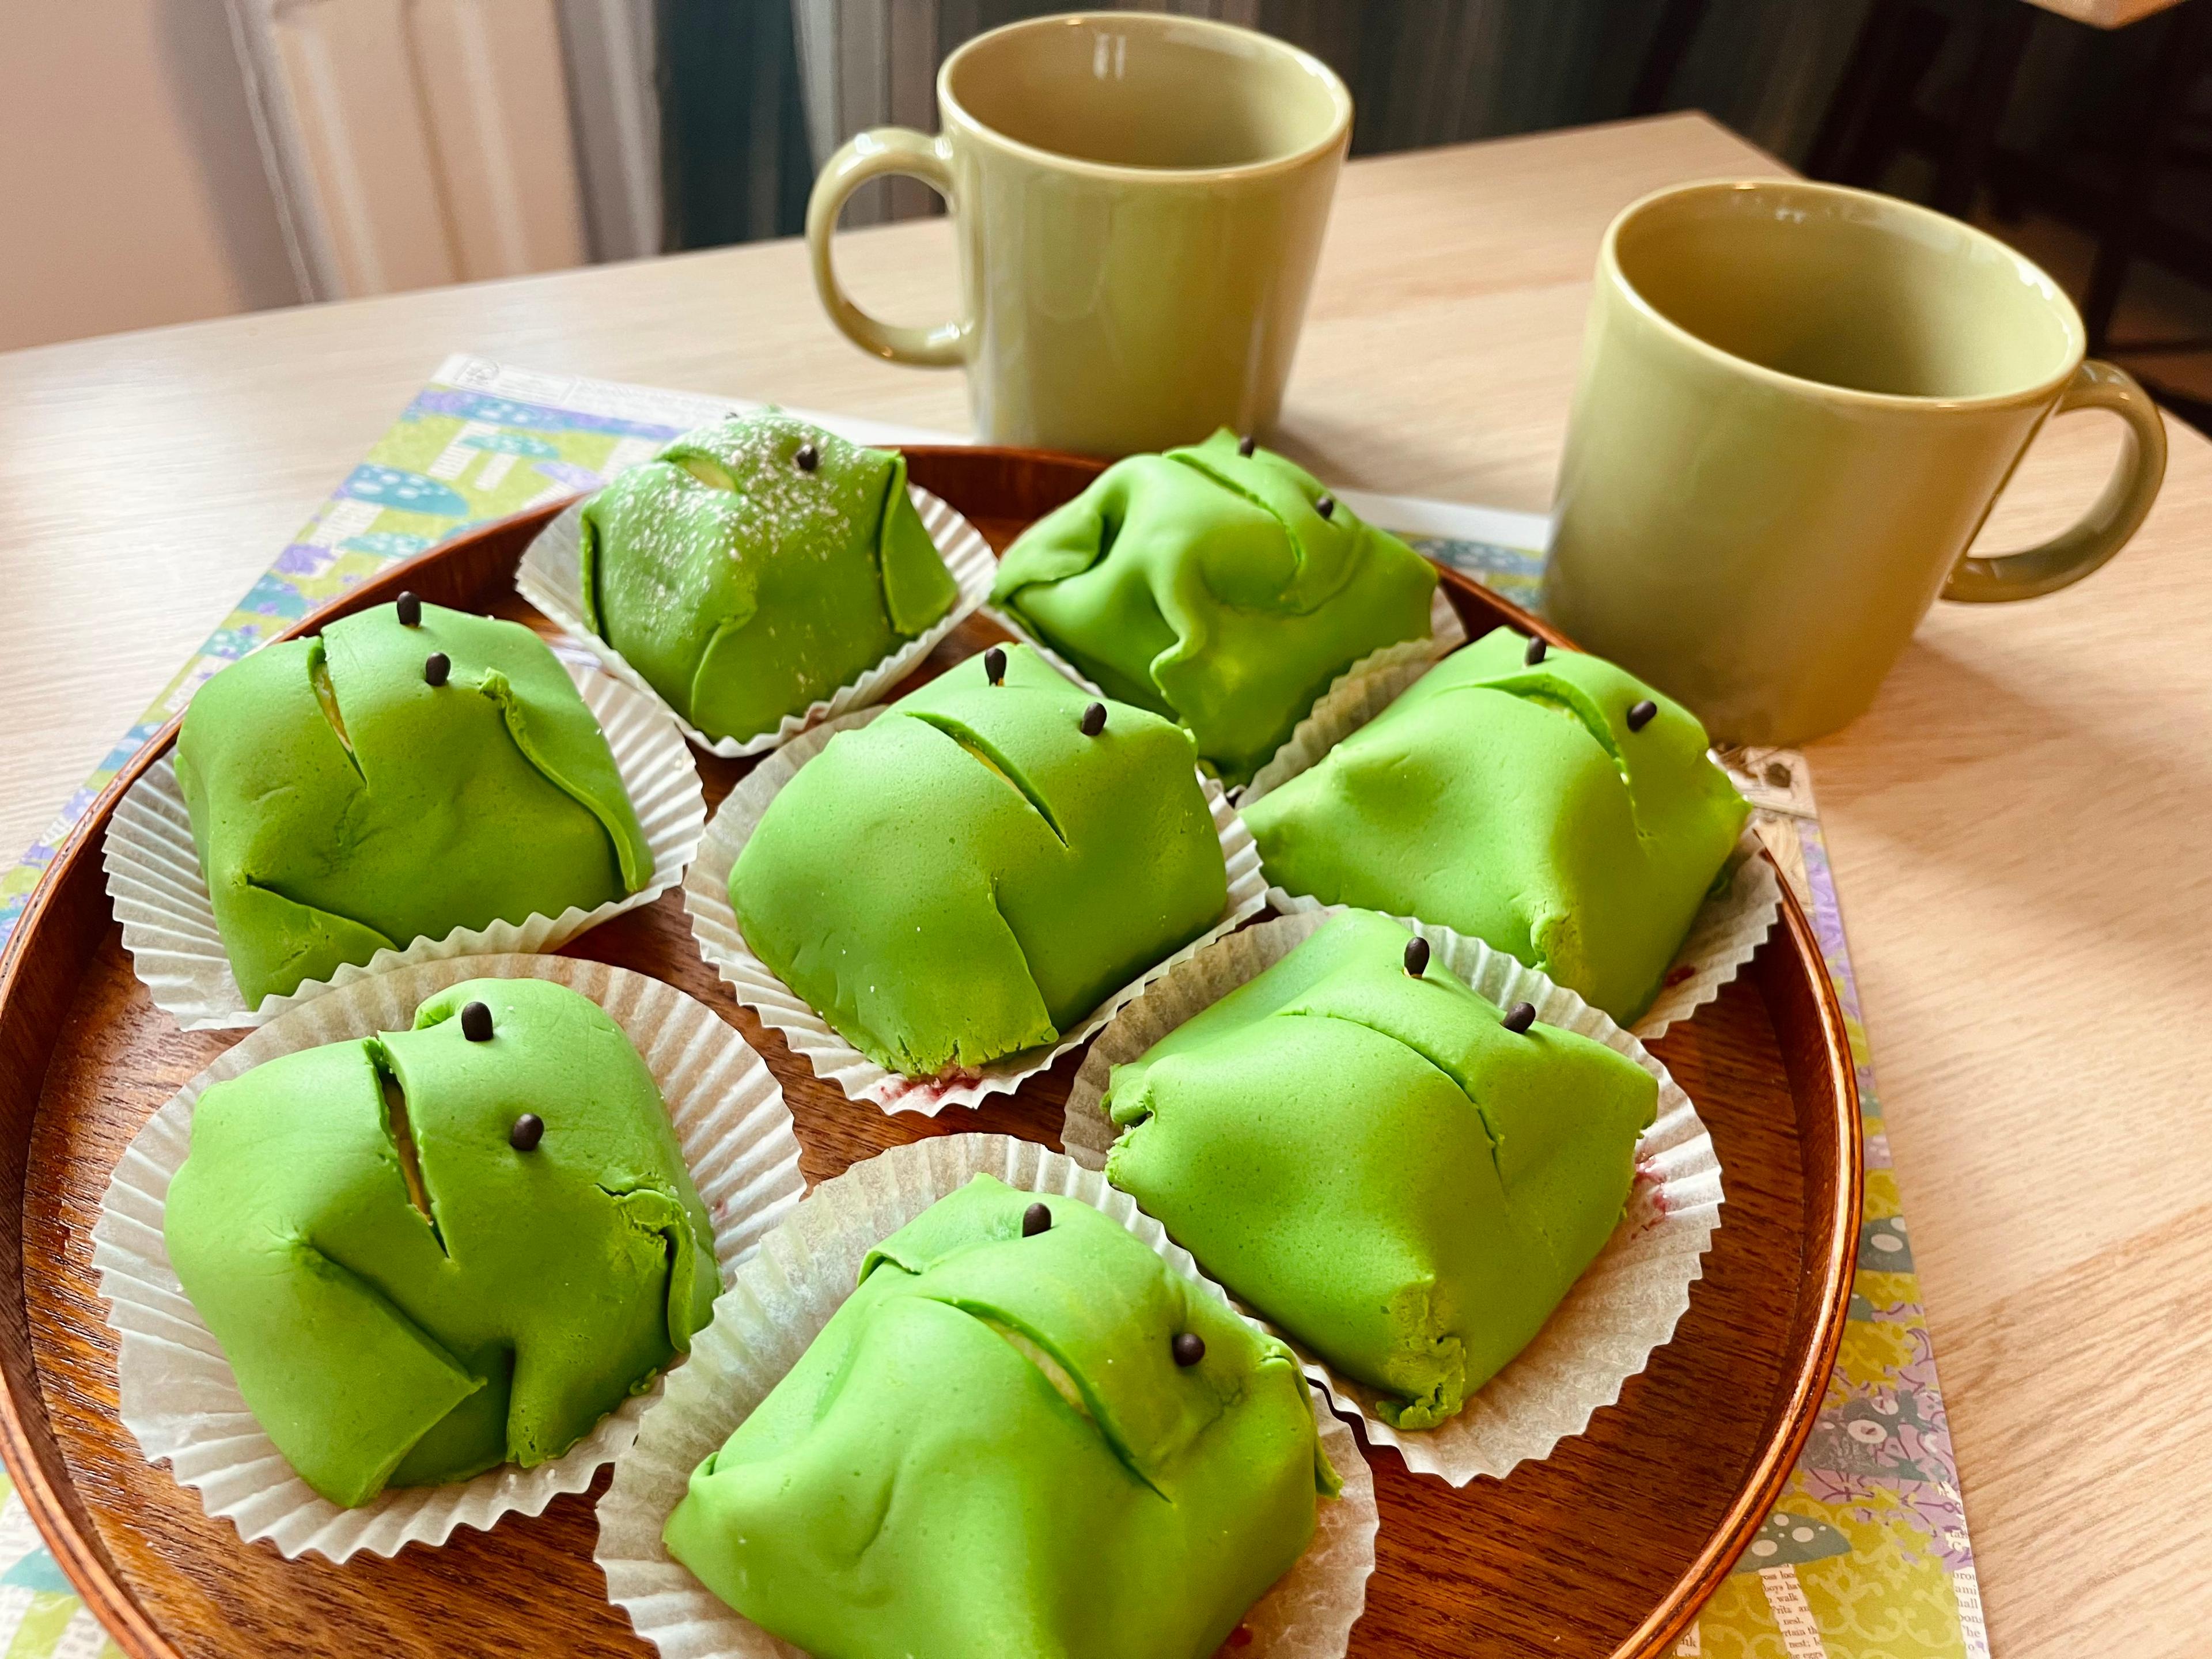 The Annual Frog Cake Competition